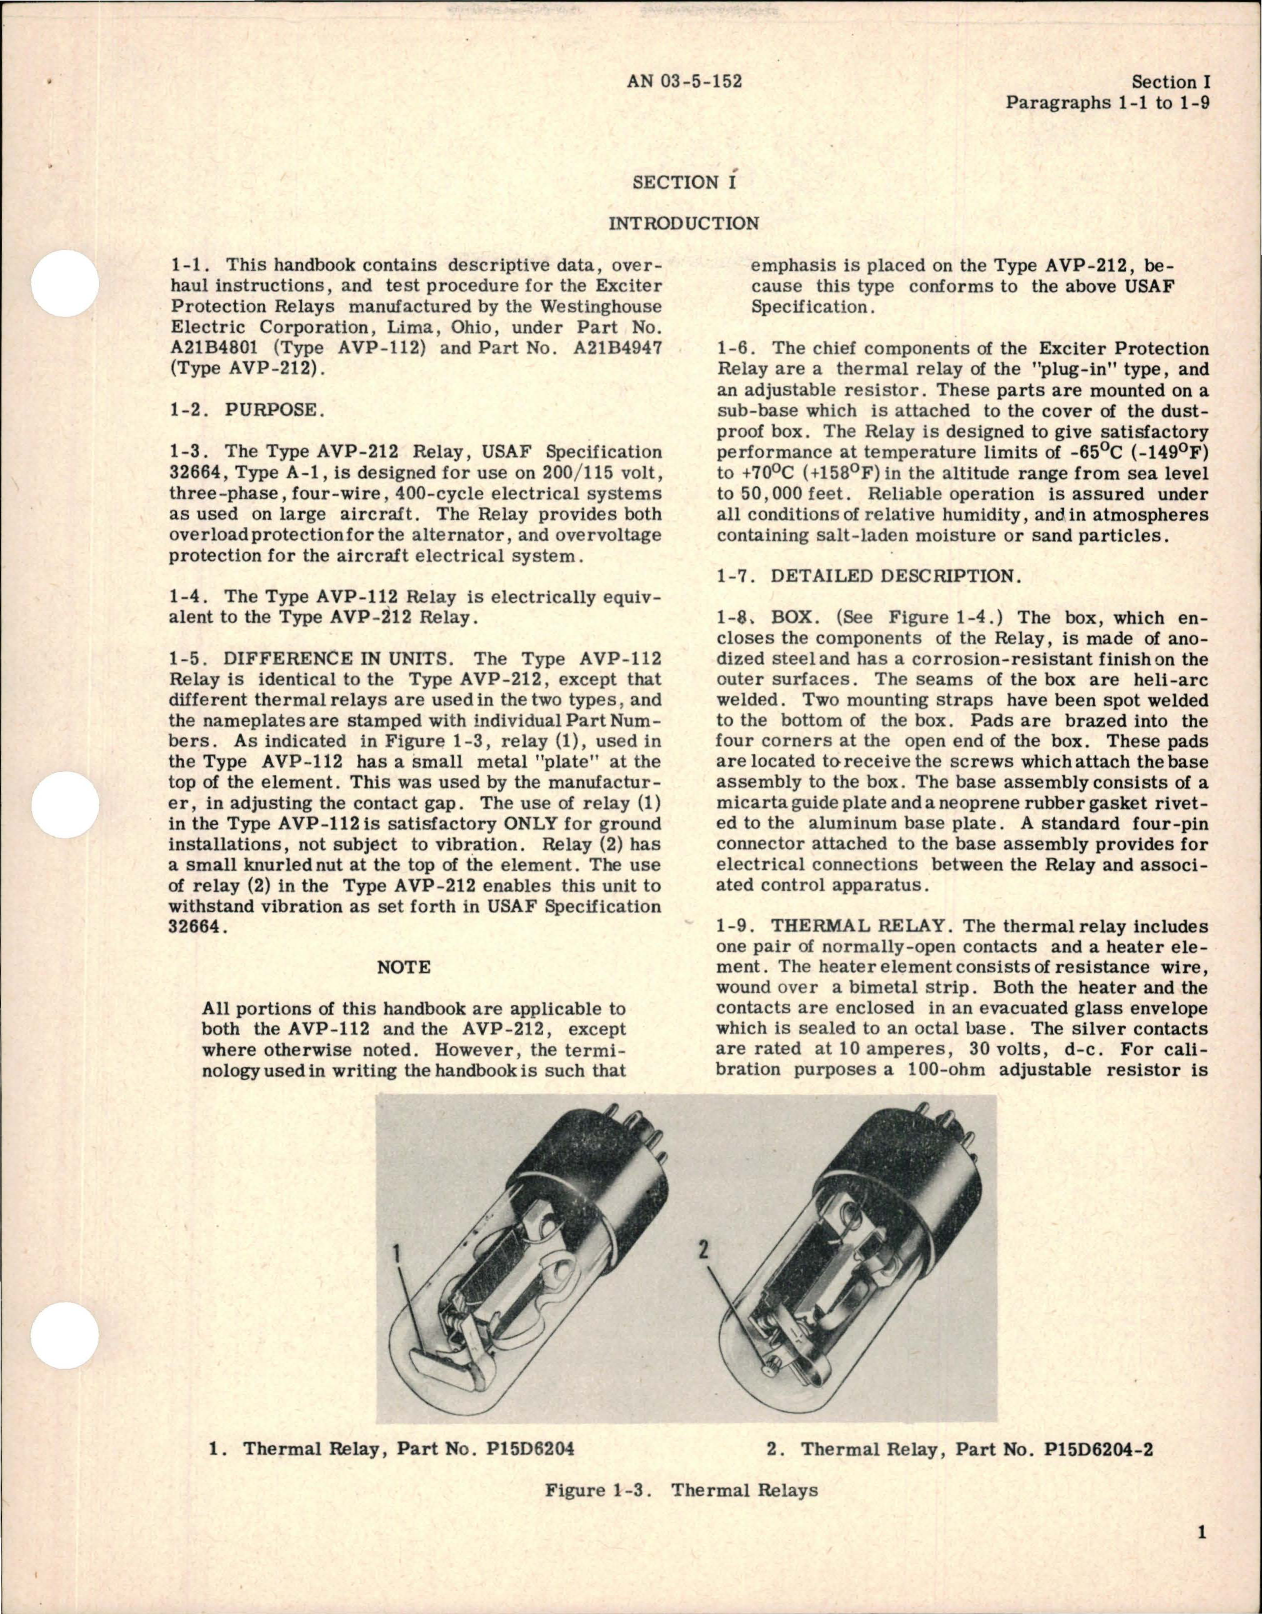 Sample page 5 from AirCorps Library document: Overhaul Instructions for Exciter Protection Relays - Parts A21B4801 and A21B4947